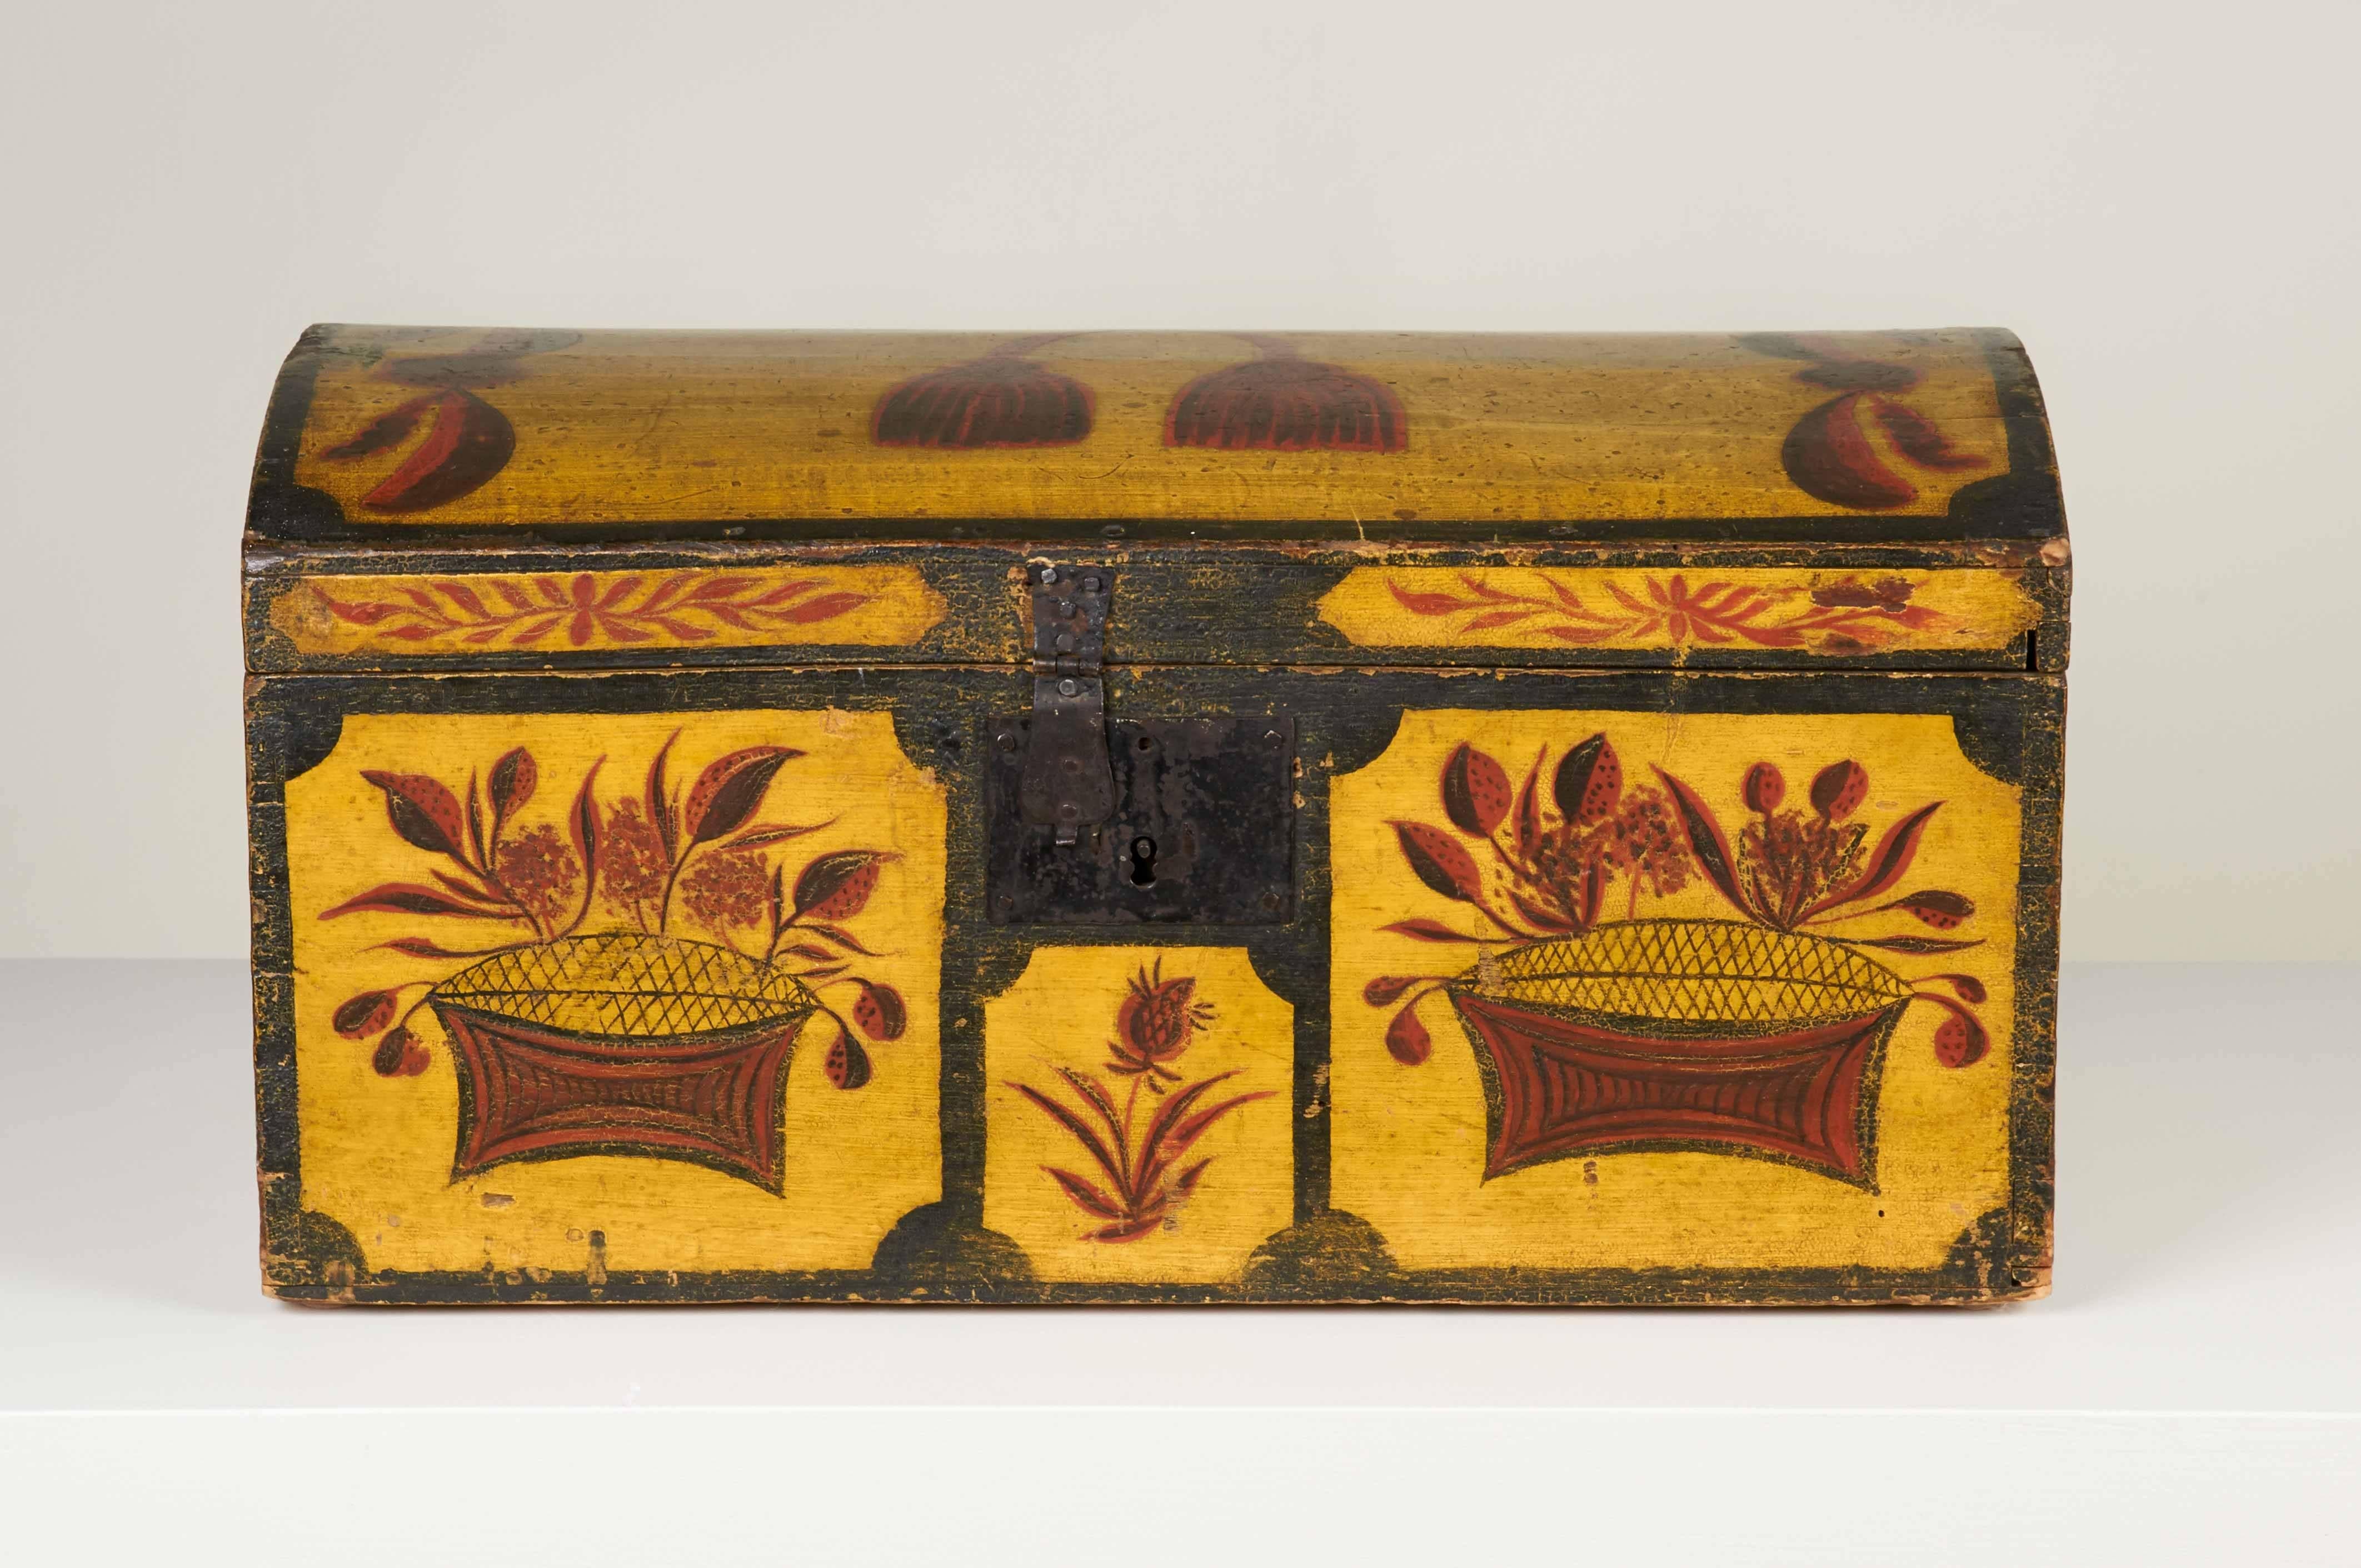 A superb Folk Art dome top box from New York State featuring a vibrant yellow ground, outlined in black, on which are painted red and black floral and foliate motifs as well as a tasseled swag which adorns the top. The box is constructed of pine and